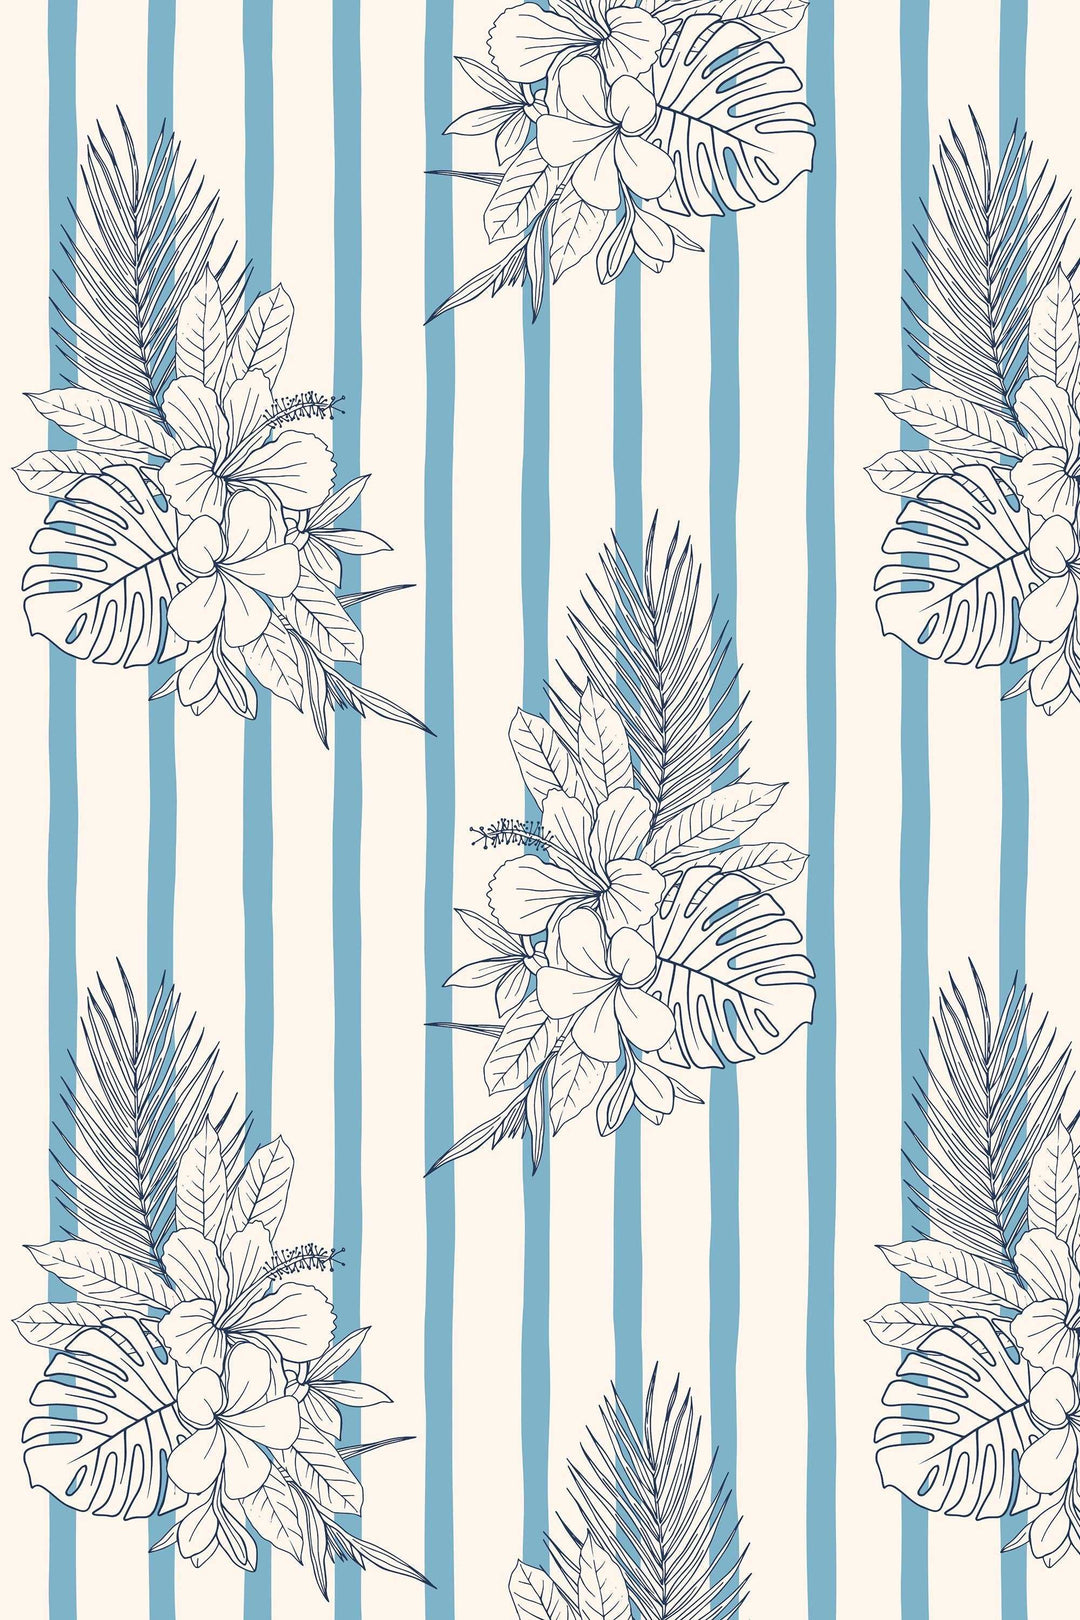 Bouquets of flowers on vertical stripes pattern blue on beige   - Removable wallpaper - Vinyl Peel and Stick Wallpaper design #3140